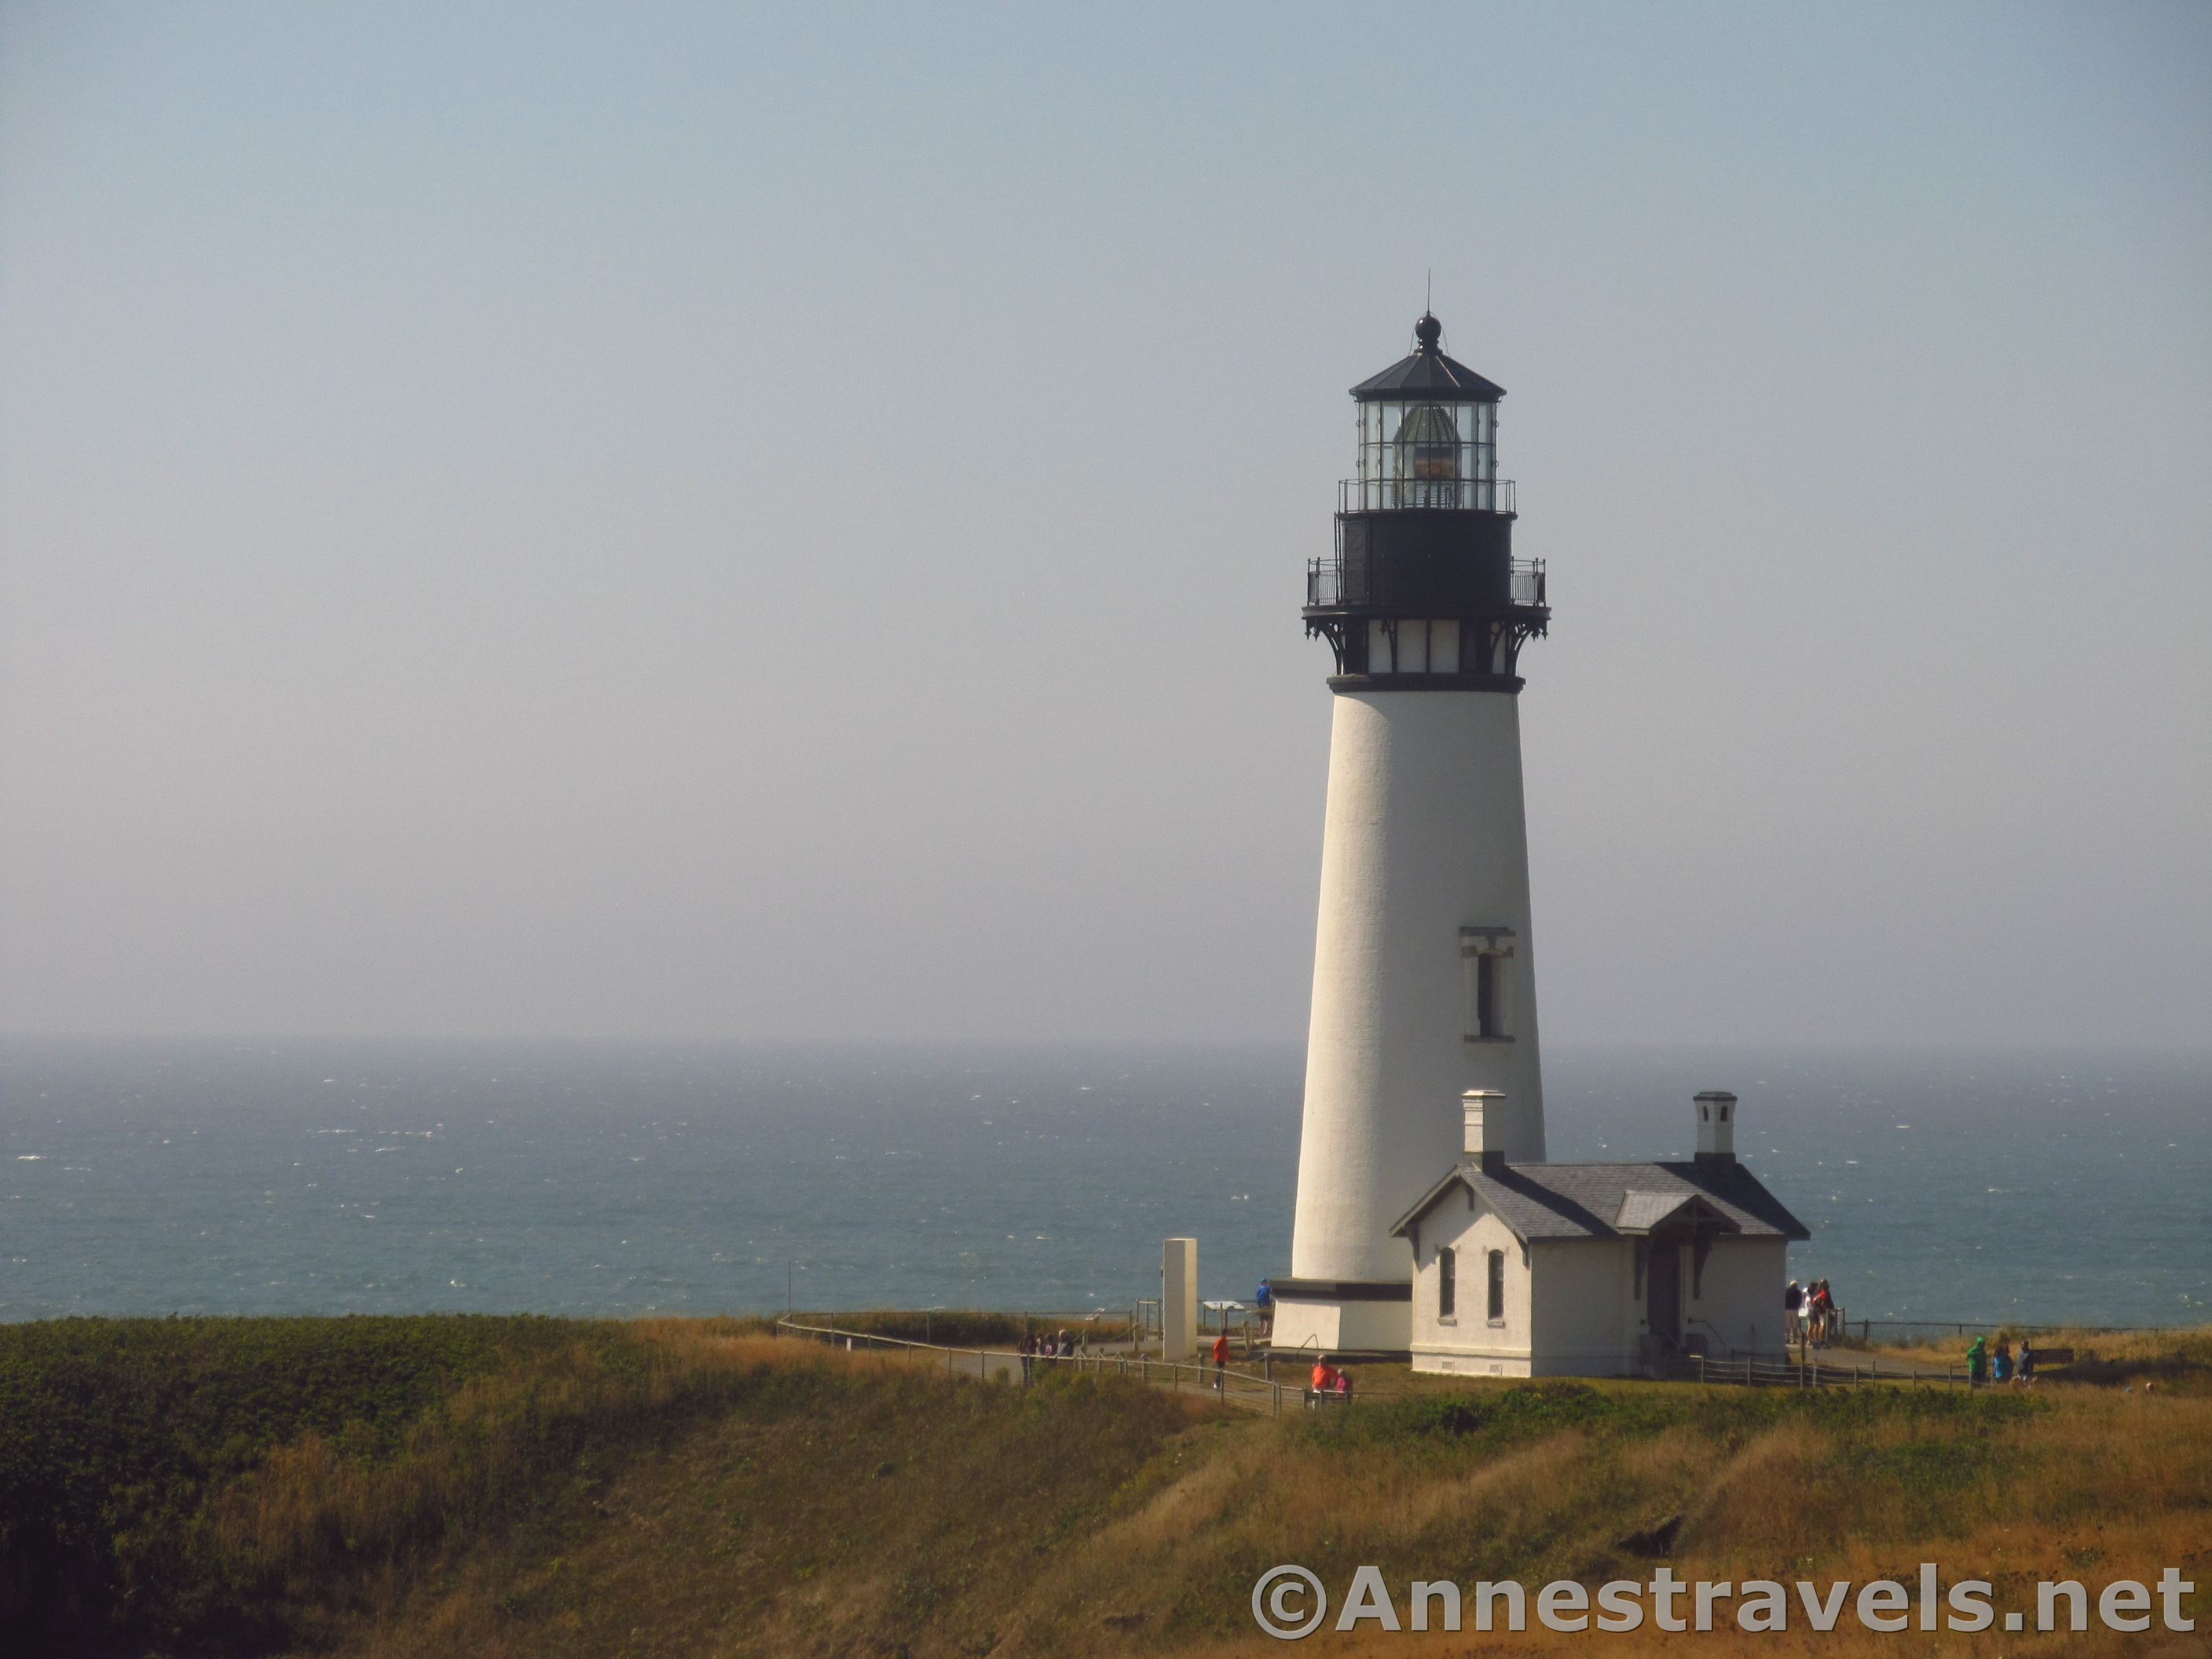 Afternoon at the Yaquina Head Lighthouse - Anne's Travels